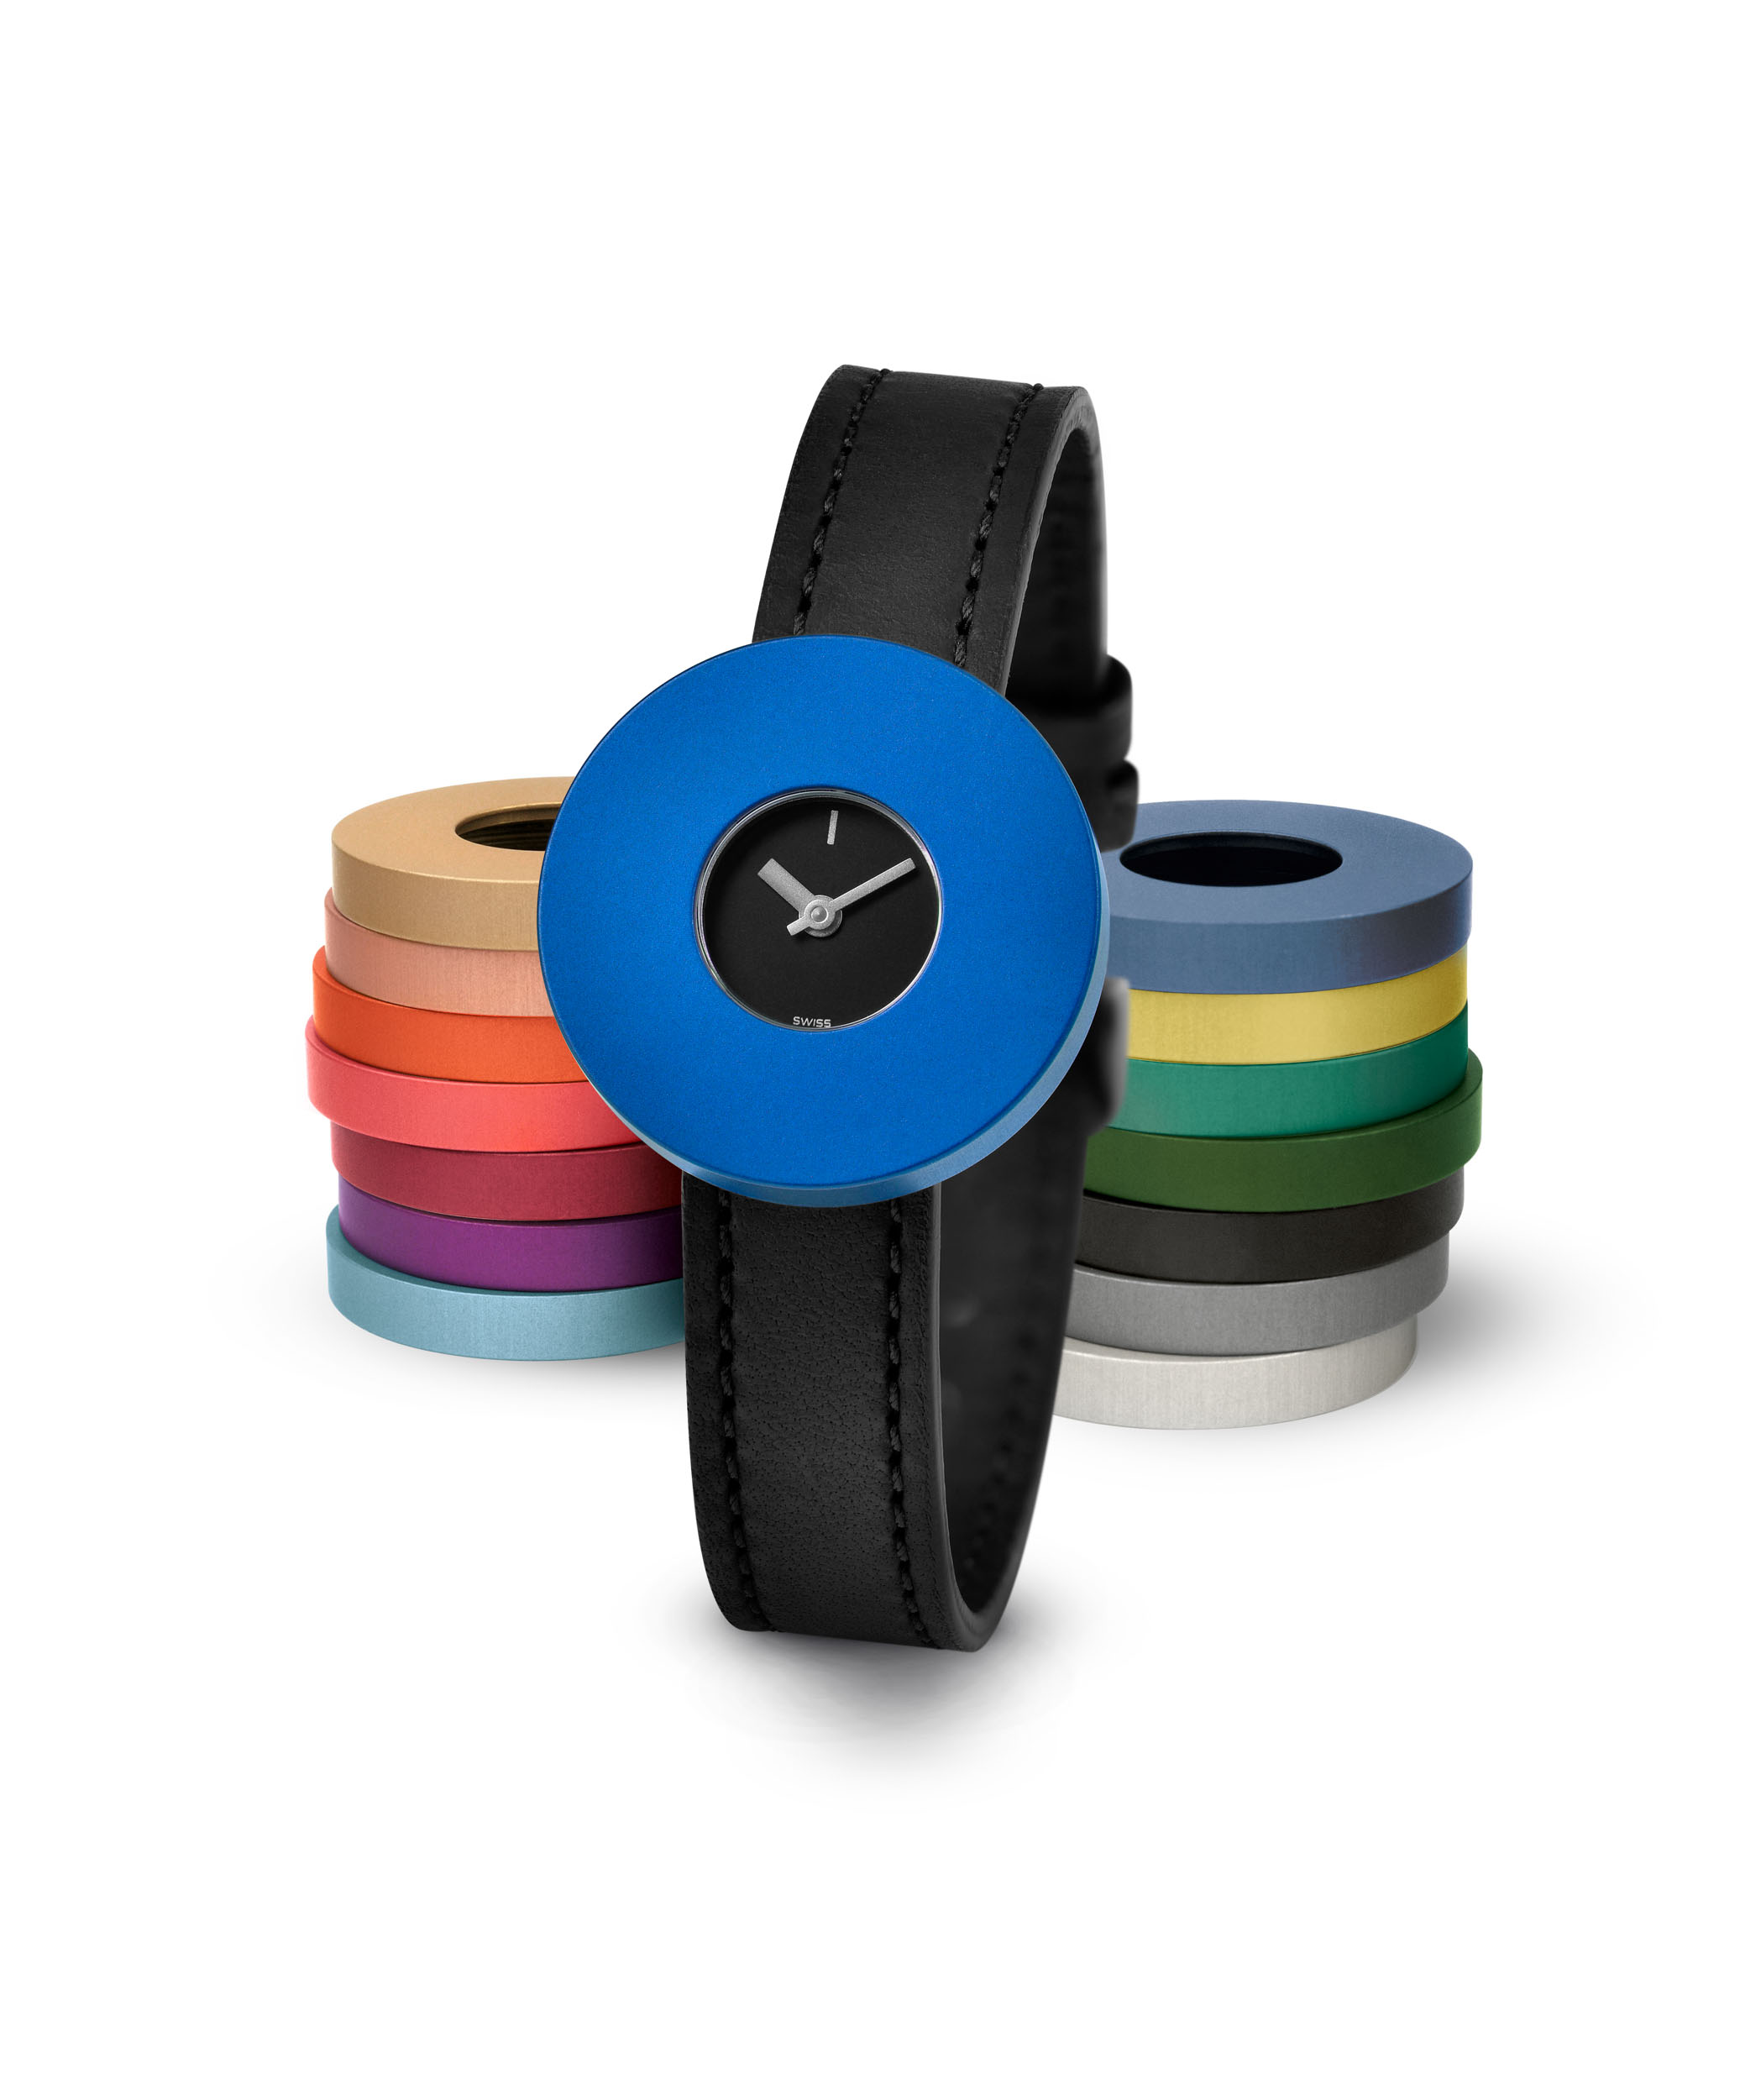 Junod-Vignelli MV Small blk_dial blue_ring leather_band-small.JPG